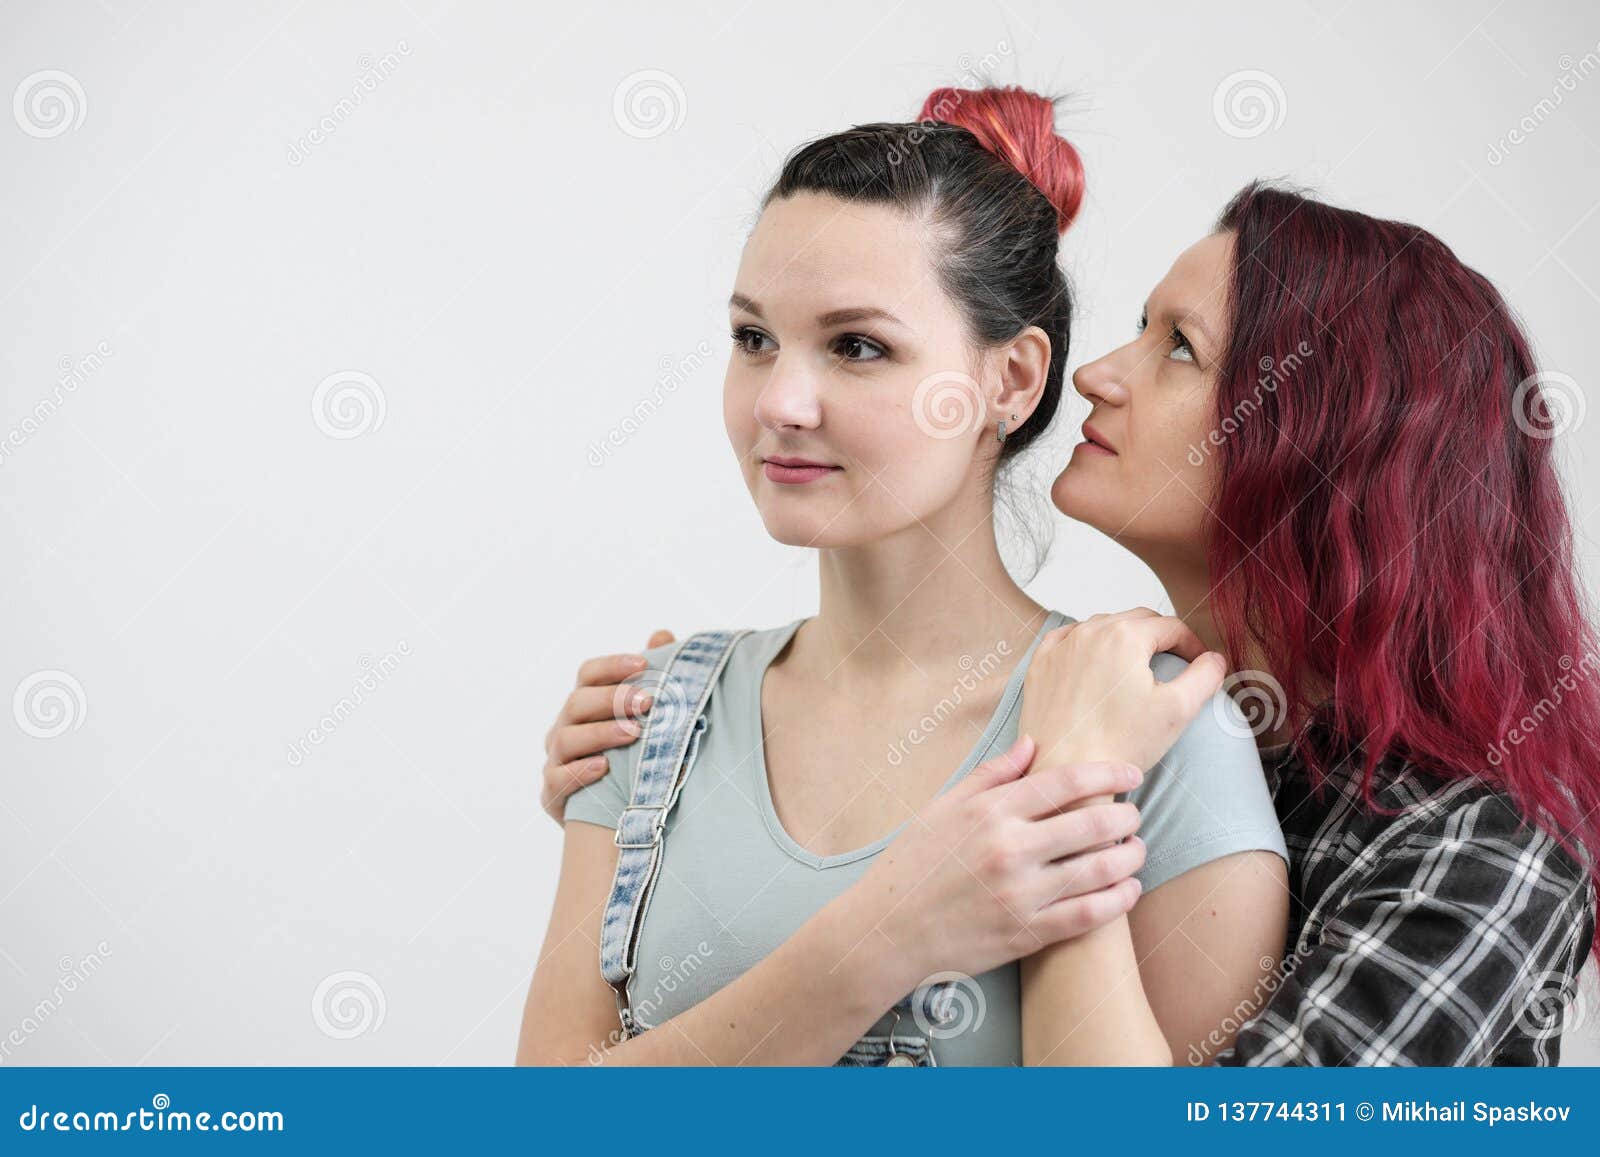 Two Girls Hug on a White Background